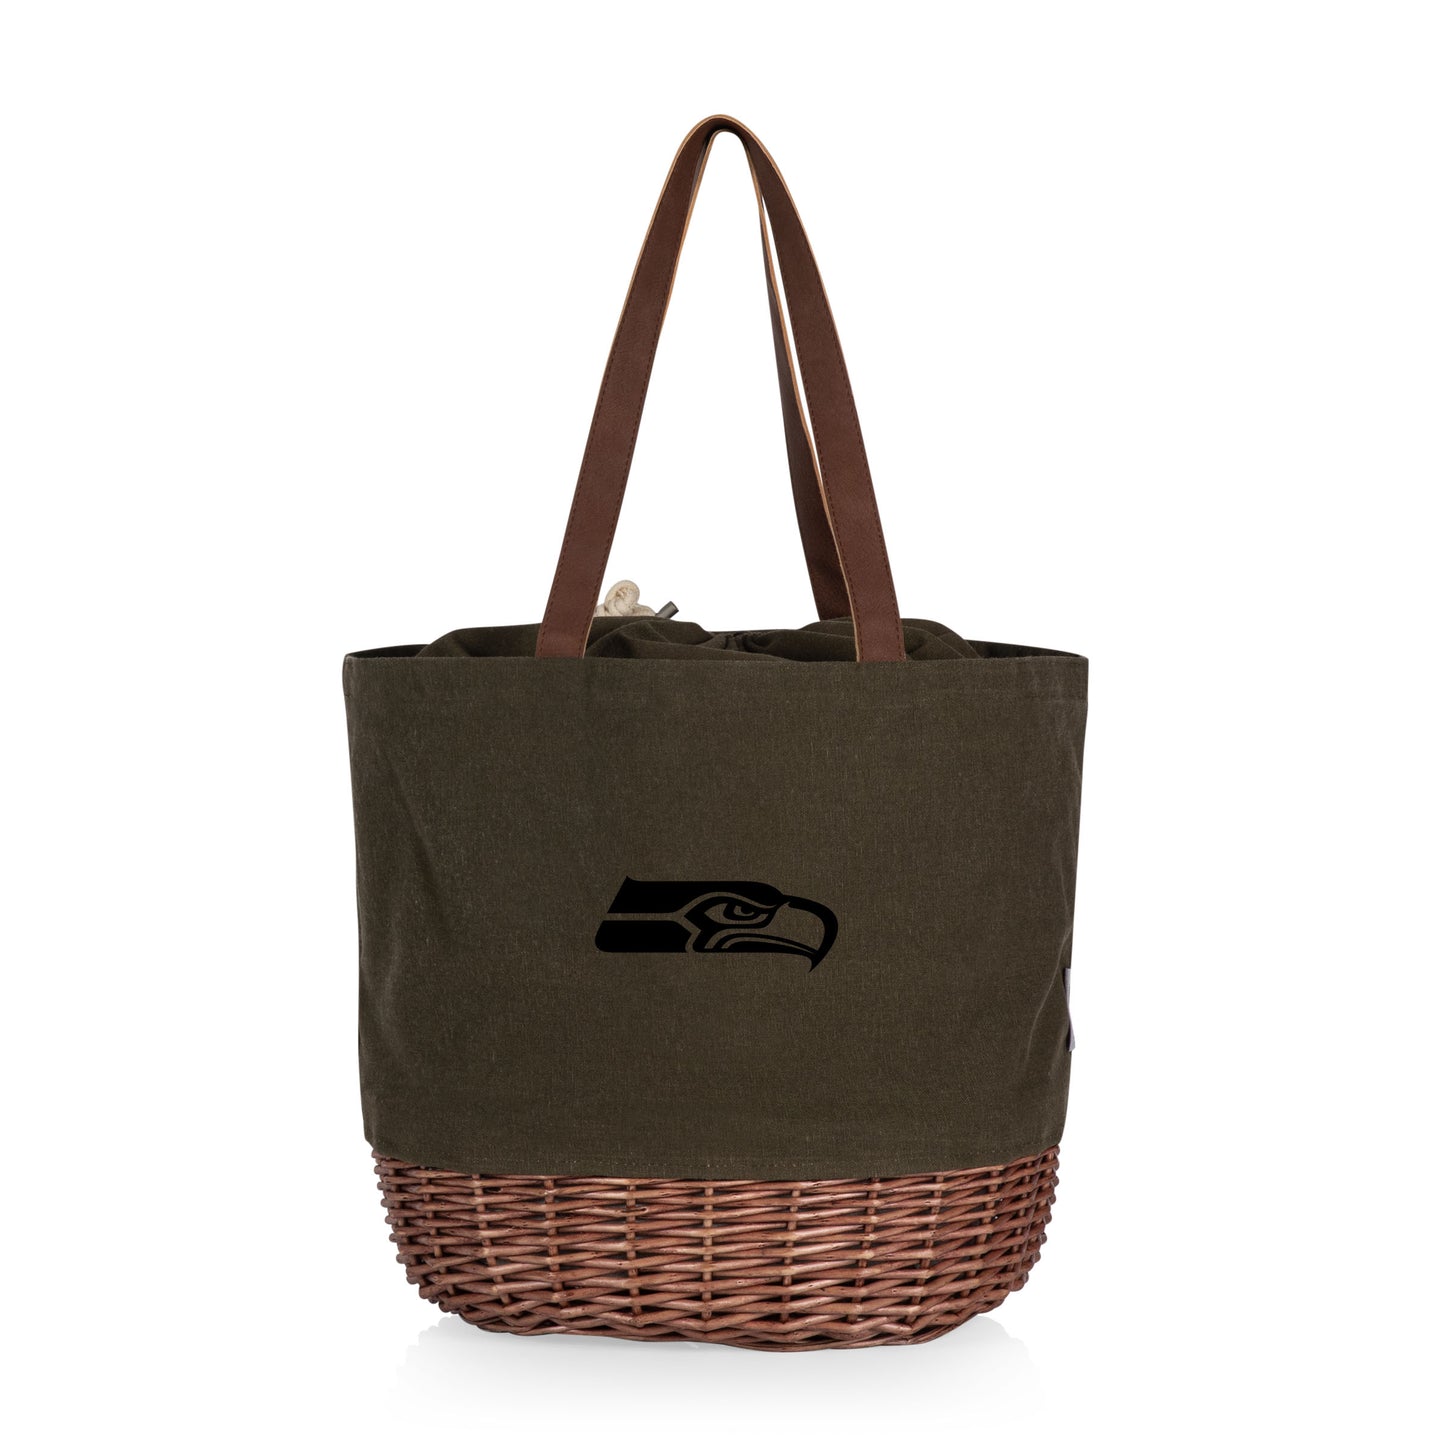 Seattle Seahawks - Coronado Canvas and Willow Basket Tote